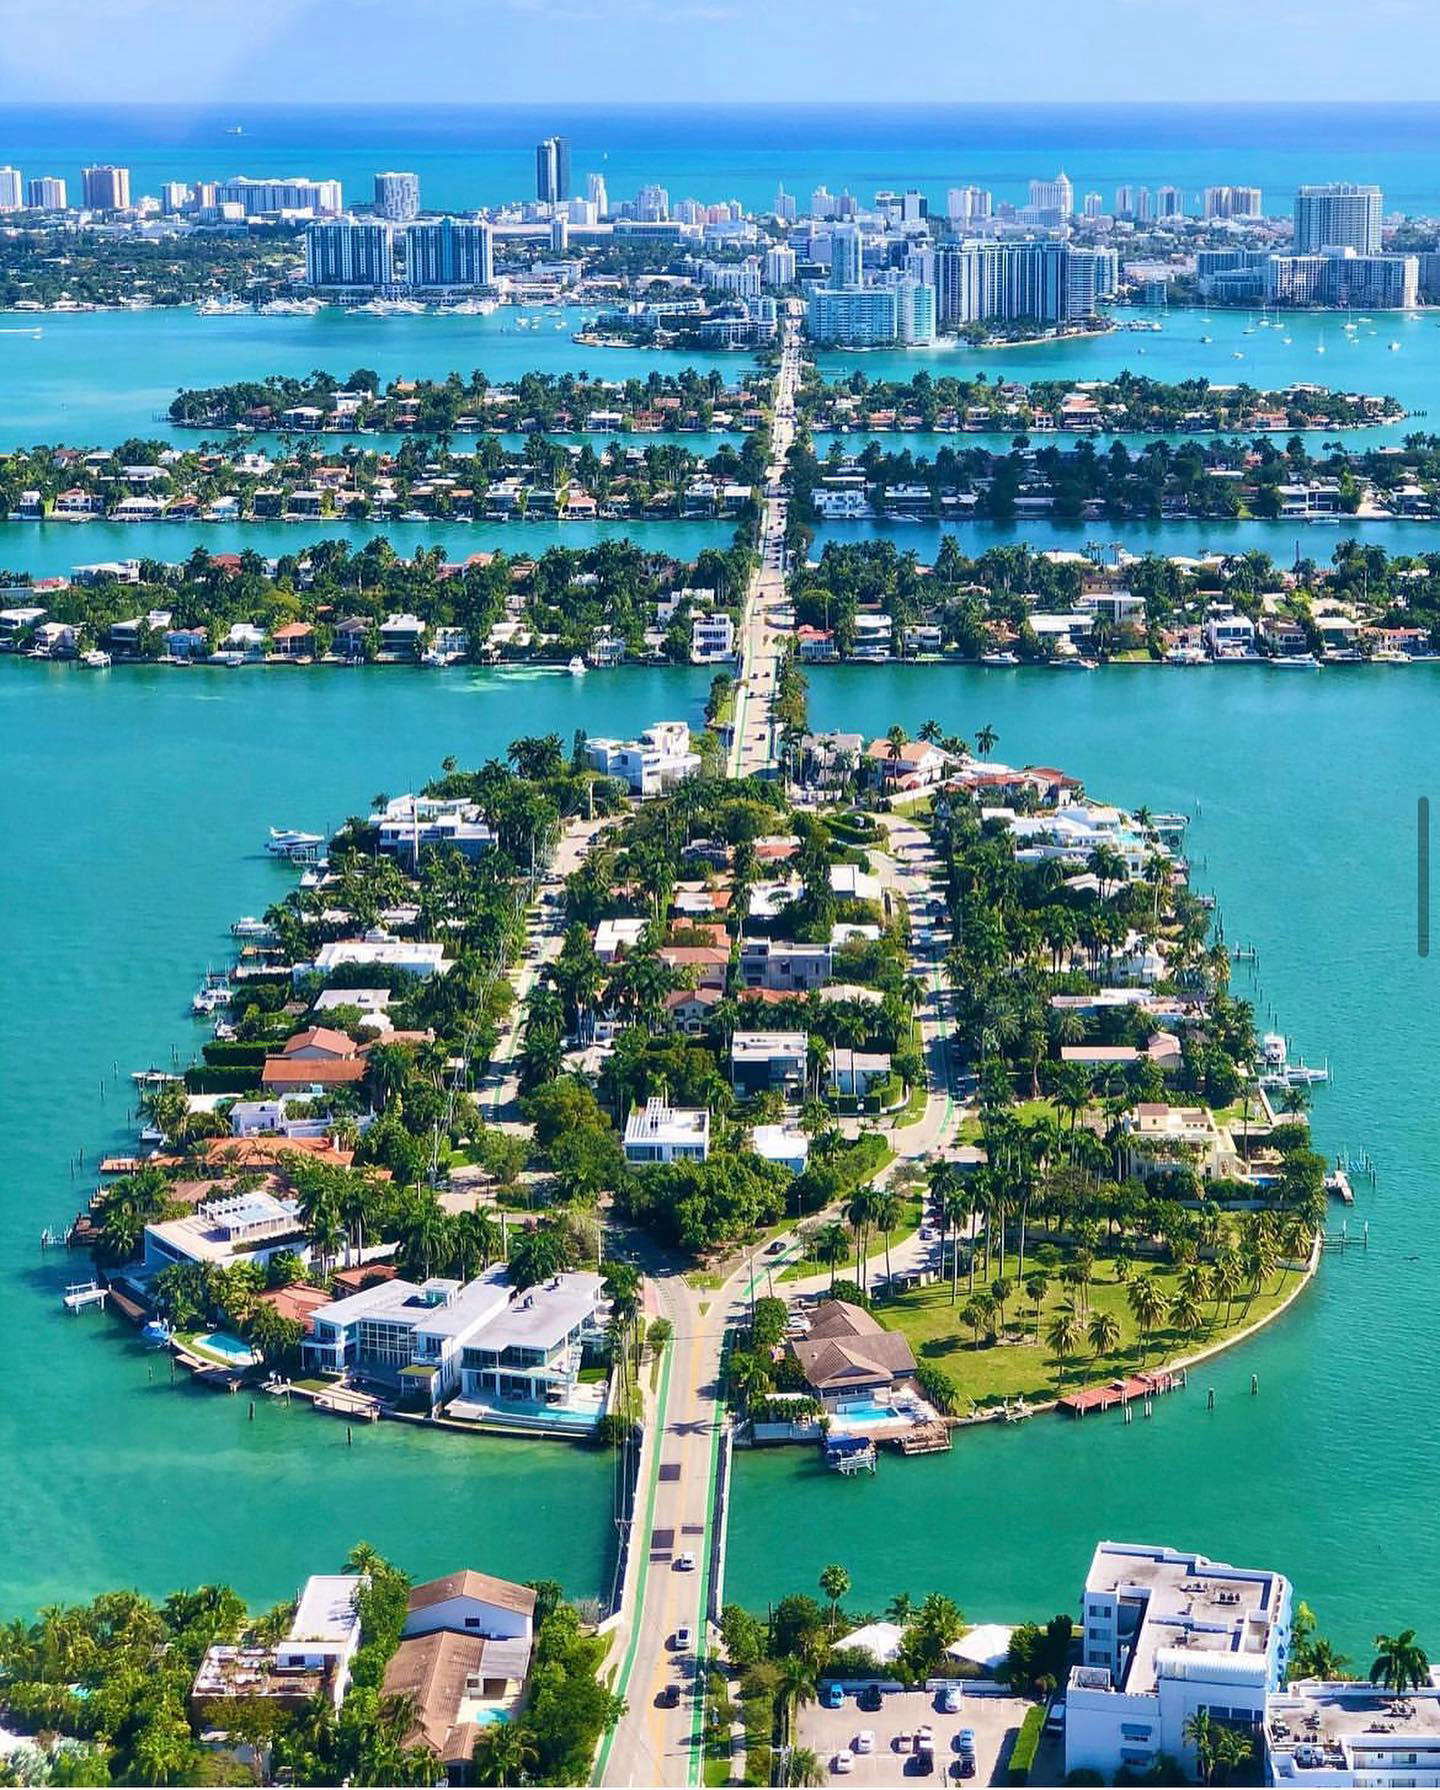 Miami - The Venetian islands are a chain of artificial islands in Biscayne Bay connecting the mainla